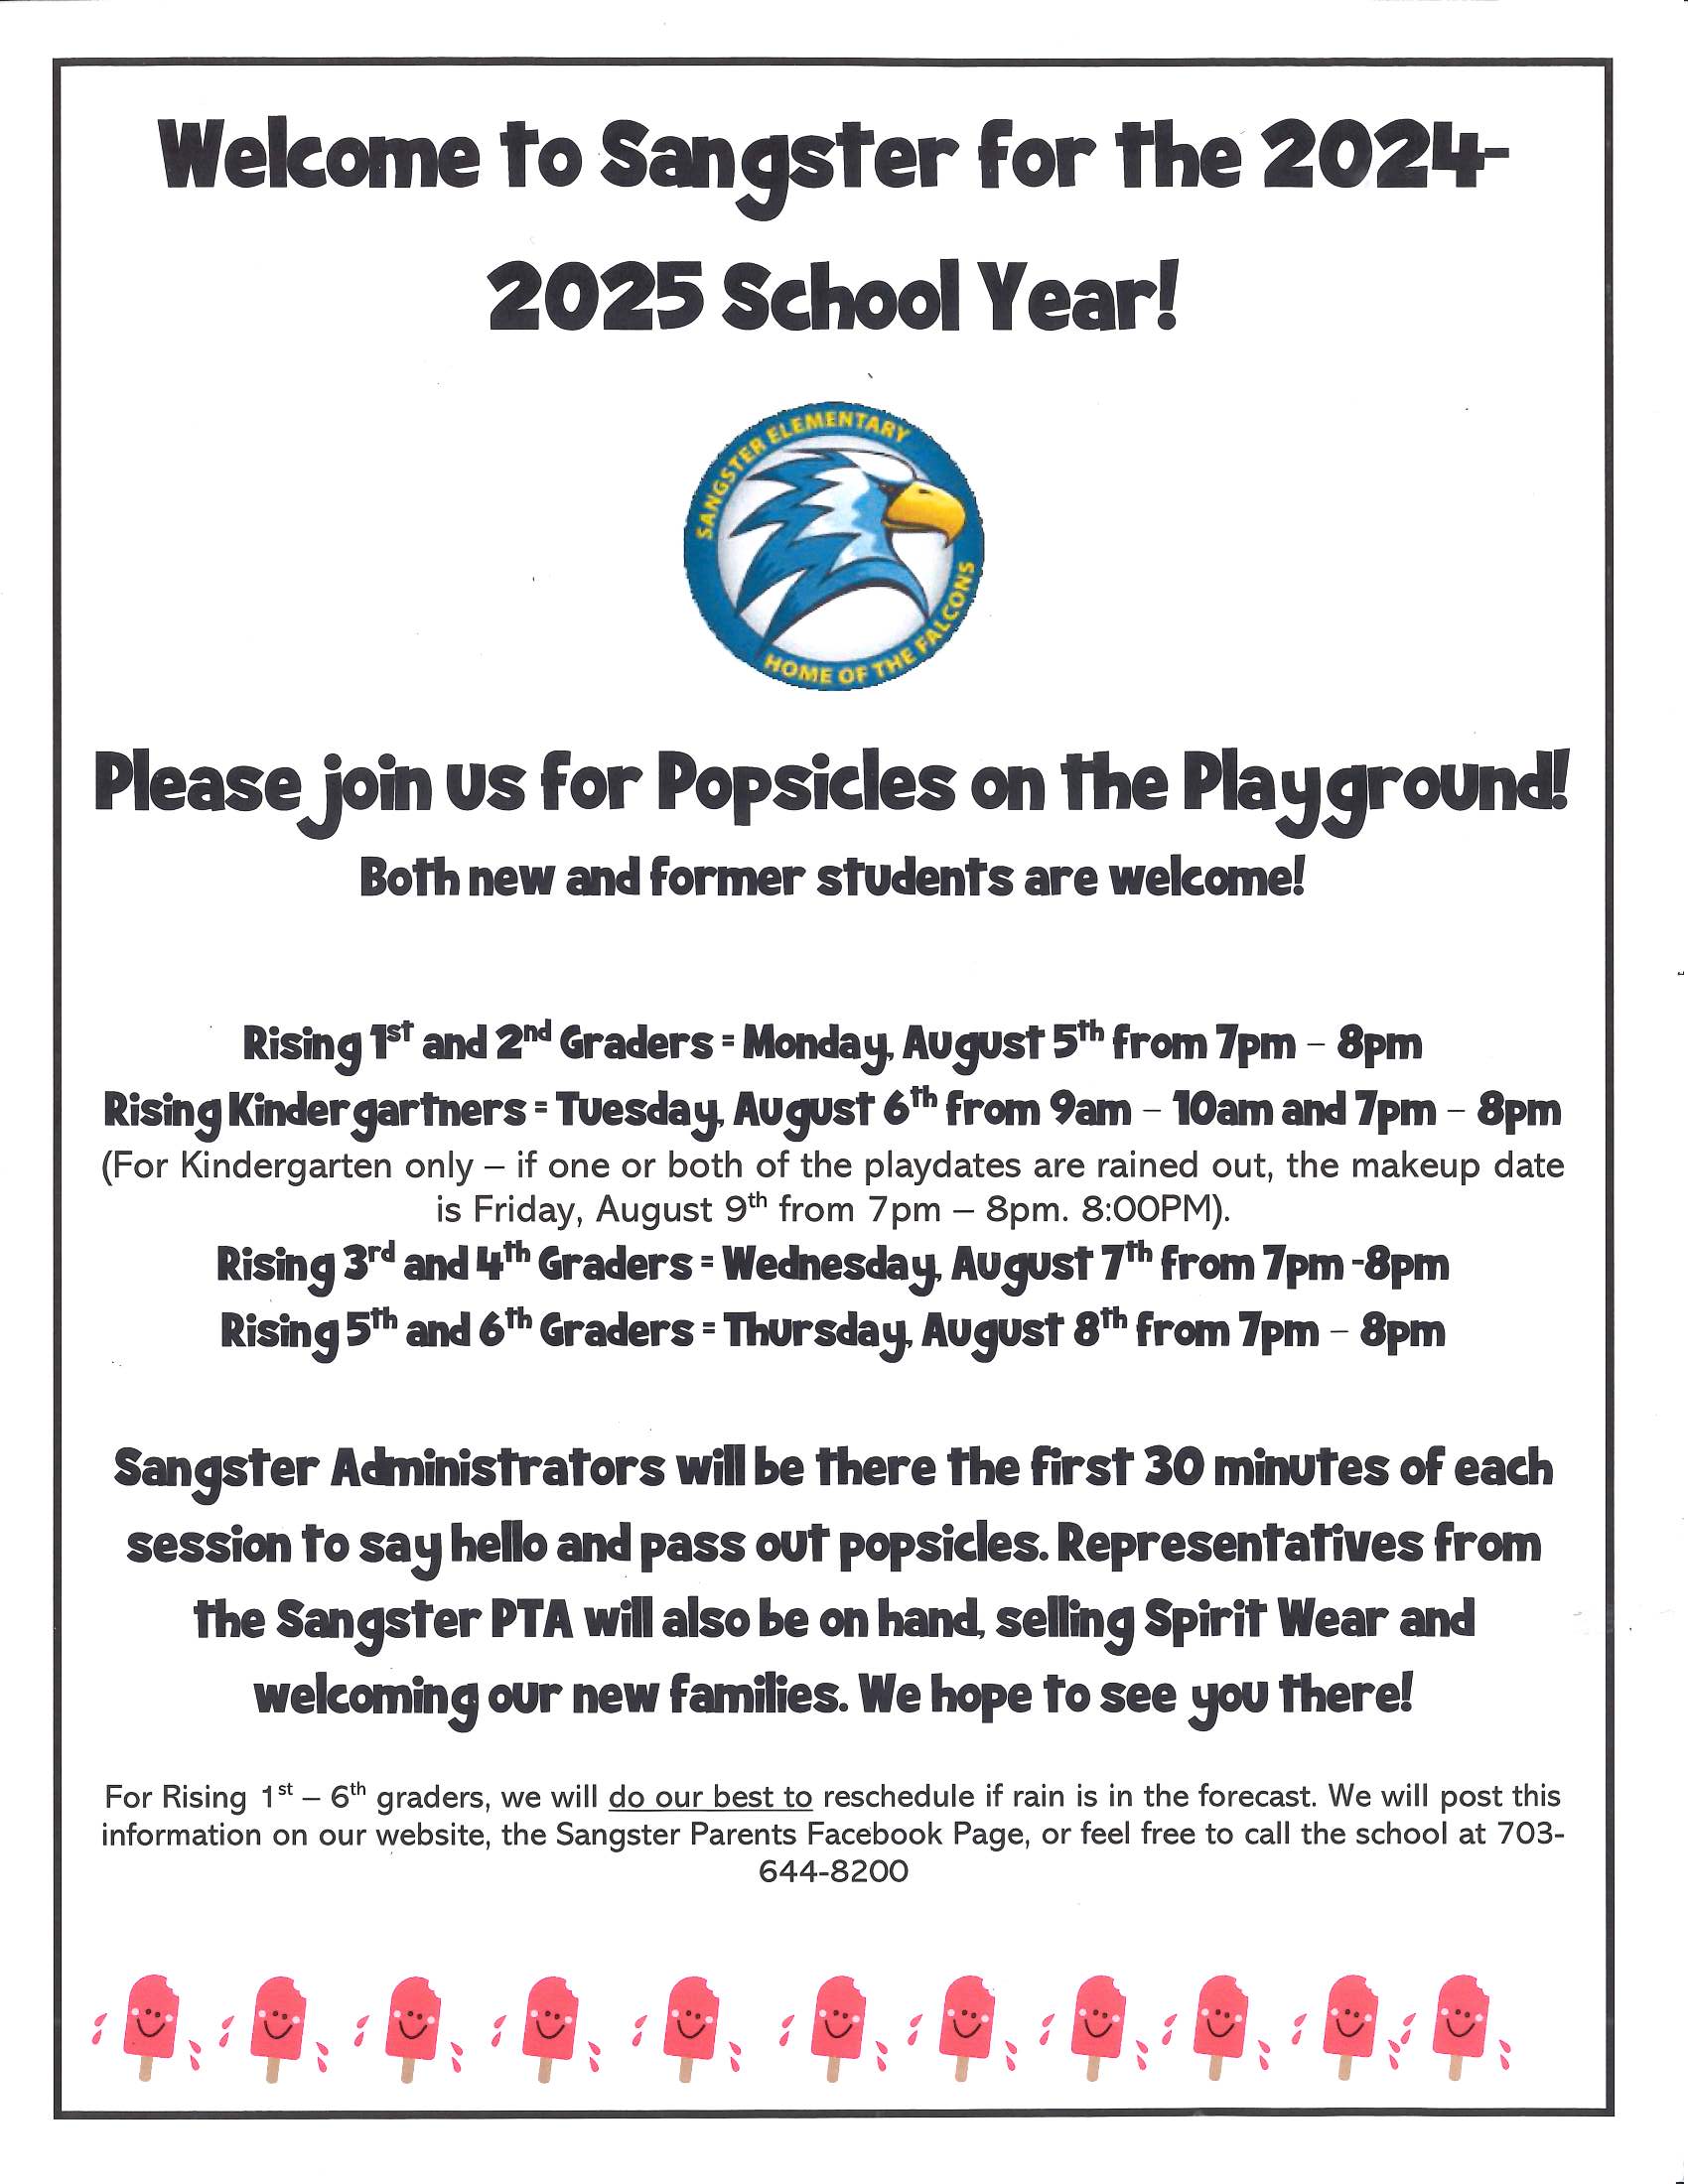 Please join us for Popsicles on the Playground. Rising 1st and 2nd graders Monday, August 5th from 7-8PM, Rising Kindergarteners Tuesday, August 6 from 9AM-10AM or 7PM-8PM, Rising 3rd and 4th graders Wednesday August 7th from 7-8PM, Rising 5th and 6th Graders Thursday August 8th from 7-8PM. Sangster administrators will be there the first 30 minutes of each session to say hello and pass out popsicles. PTA will also be on hand selling spirit wear and welcoming our new families. We hope to see you there!